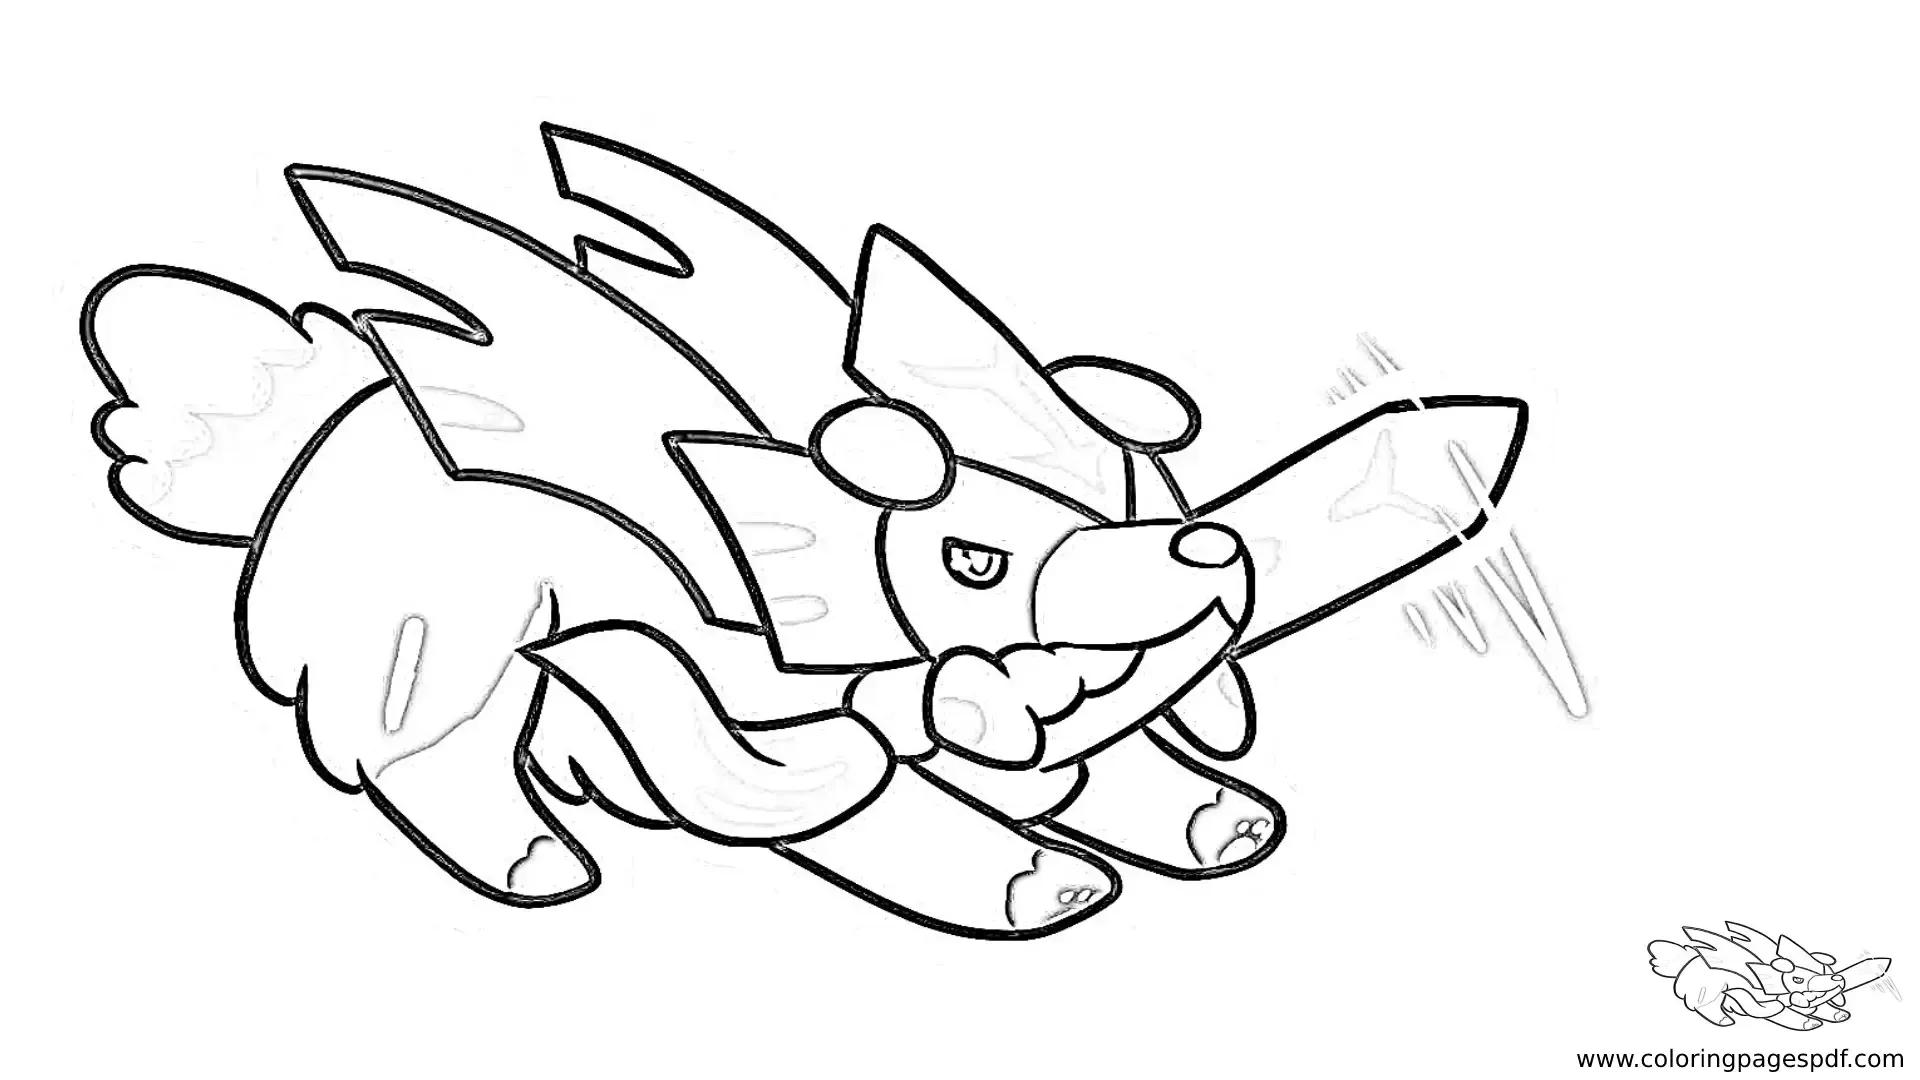 Coloring Page Of A Cute Crowned Sword Zacian